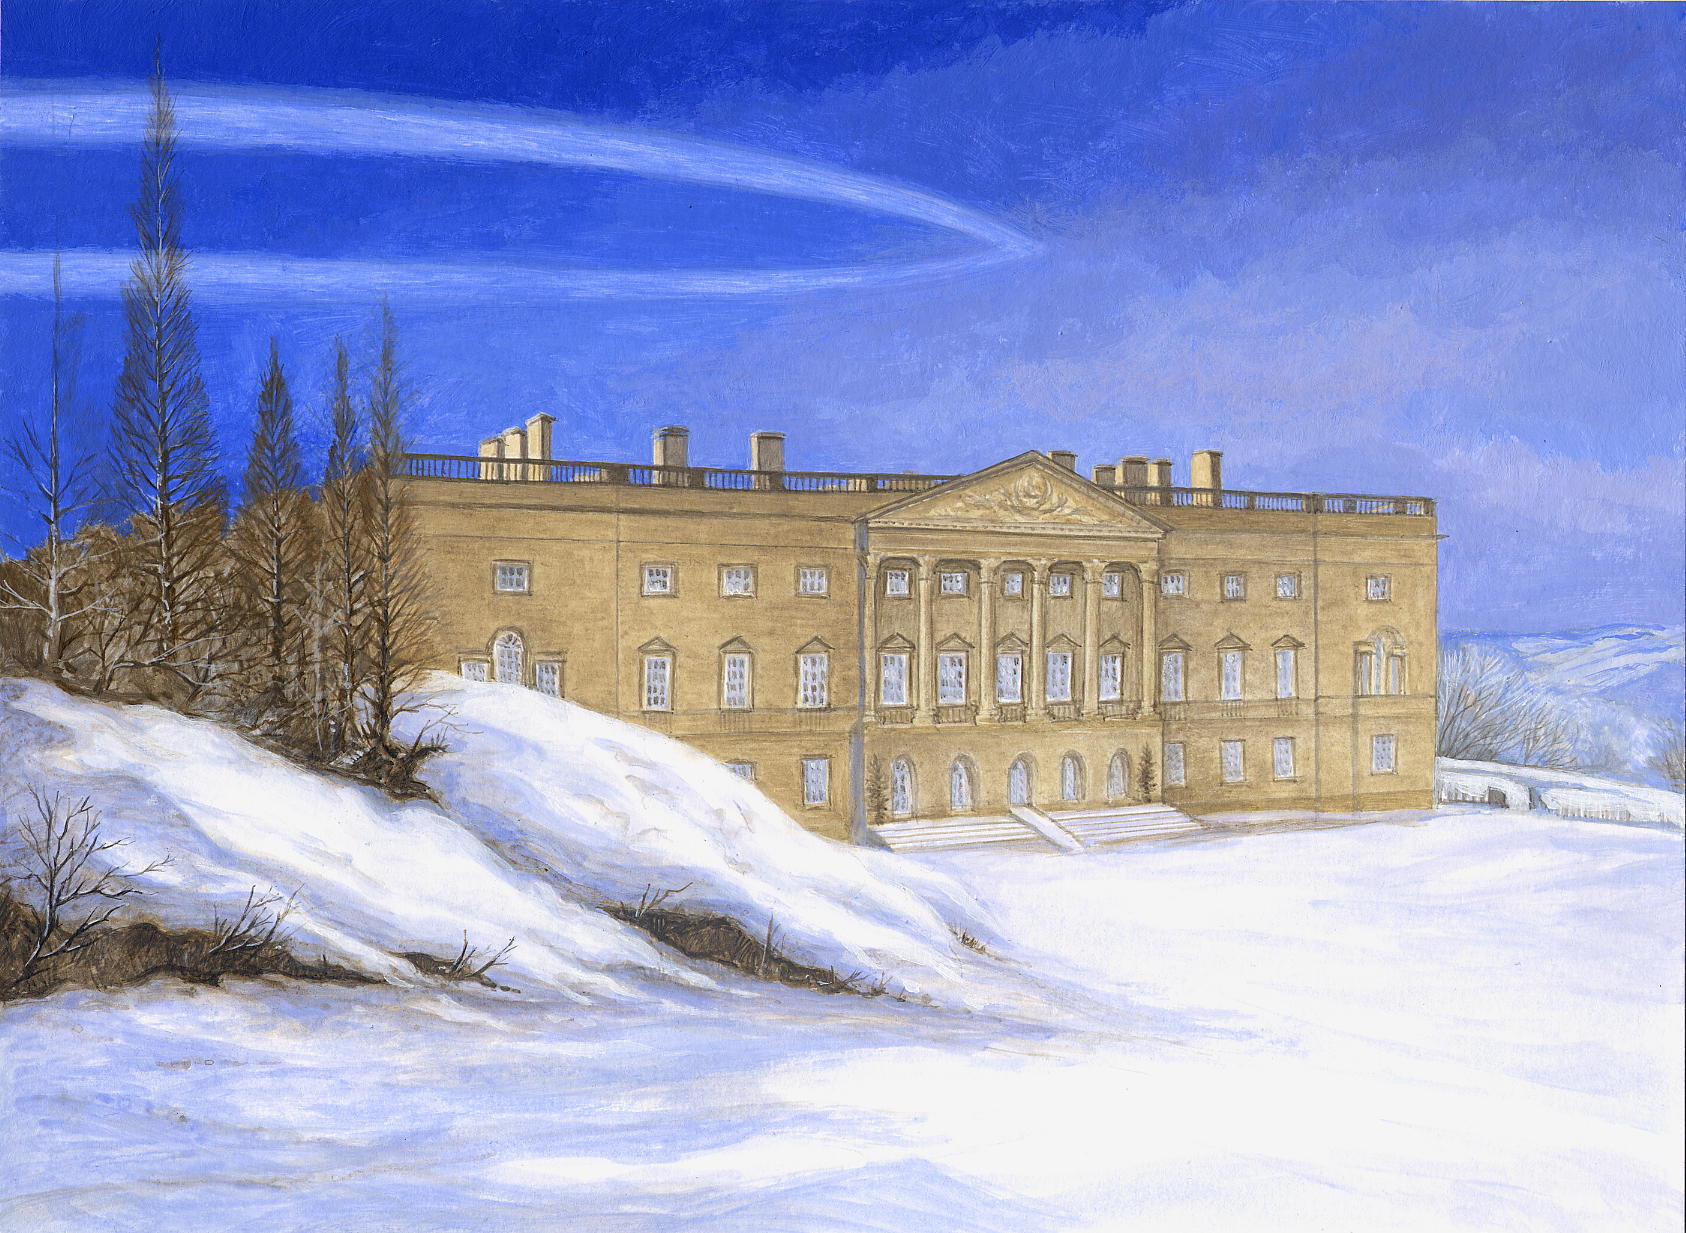 Steve Greaves - Wentworth Castle - landscape painting in acrylic